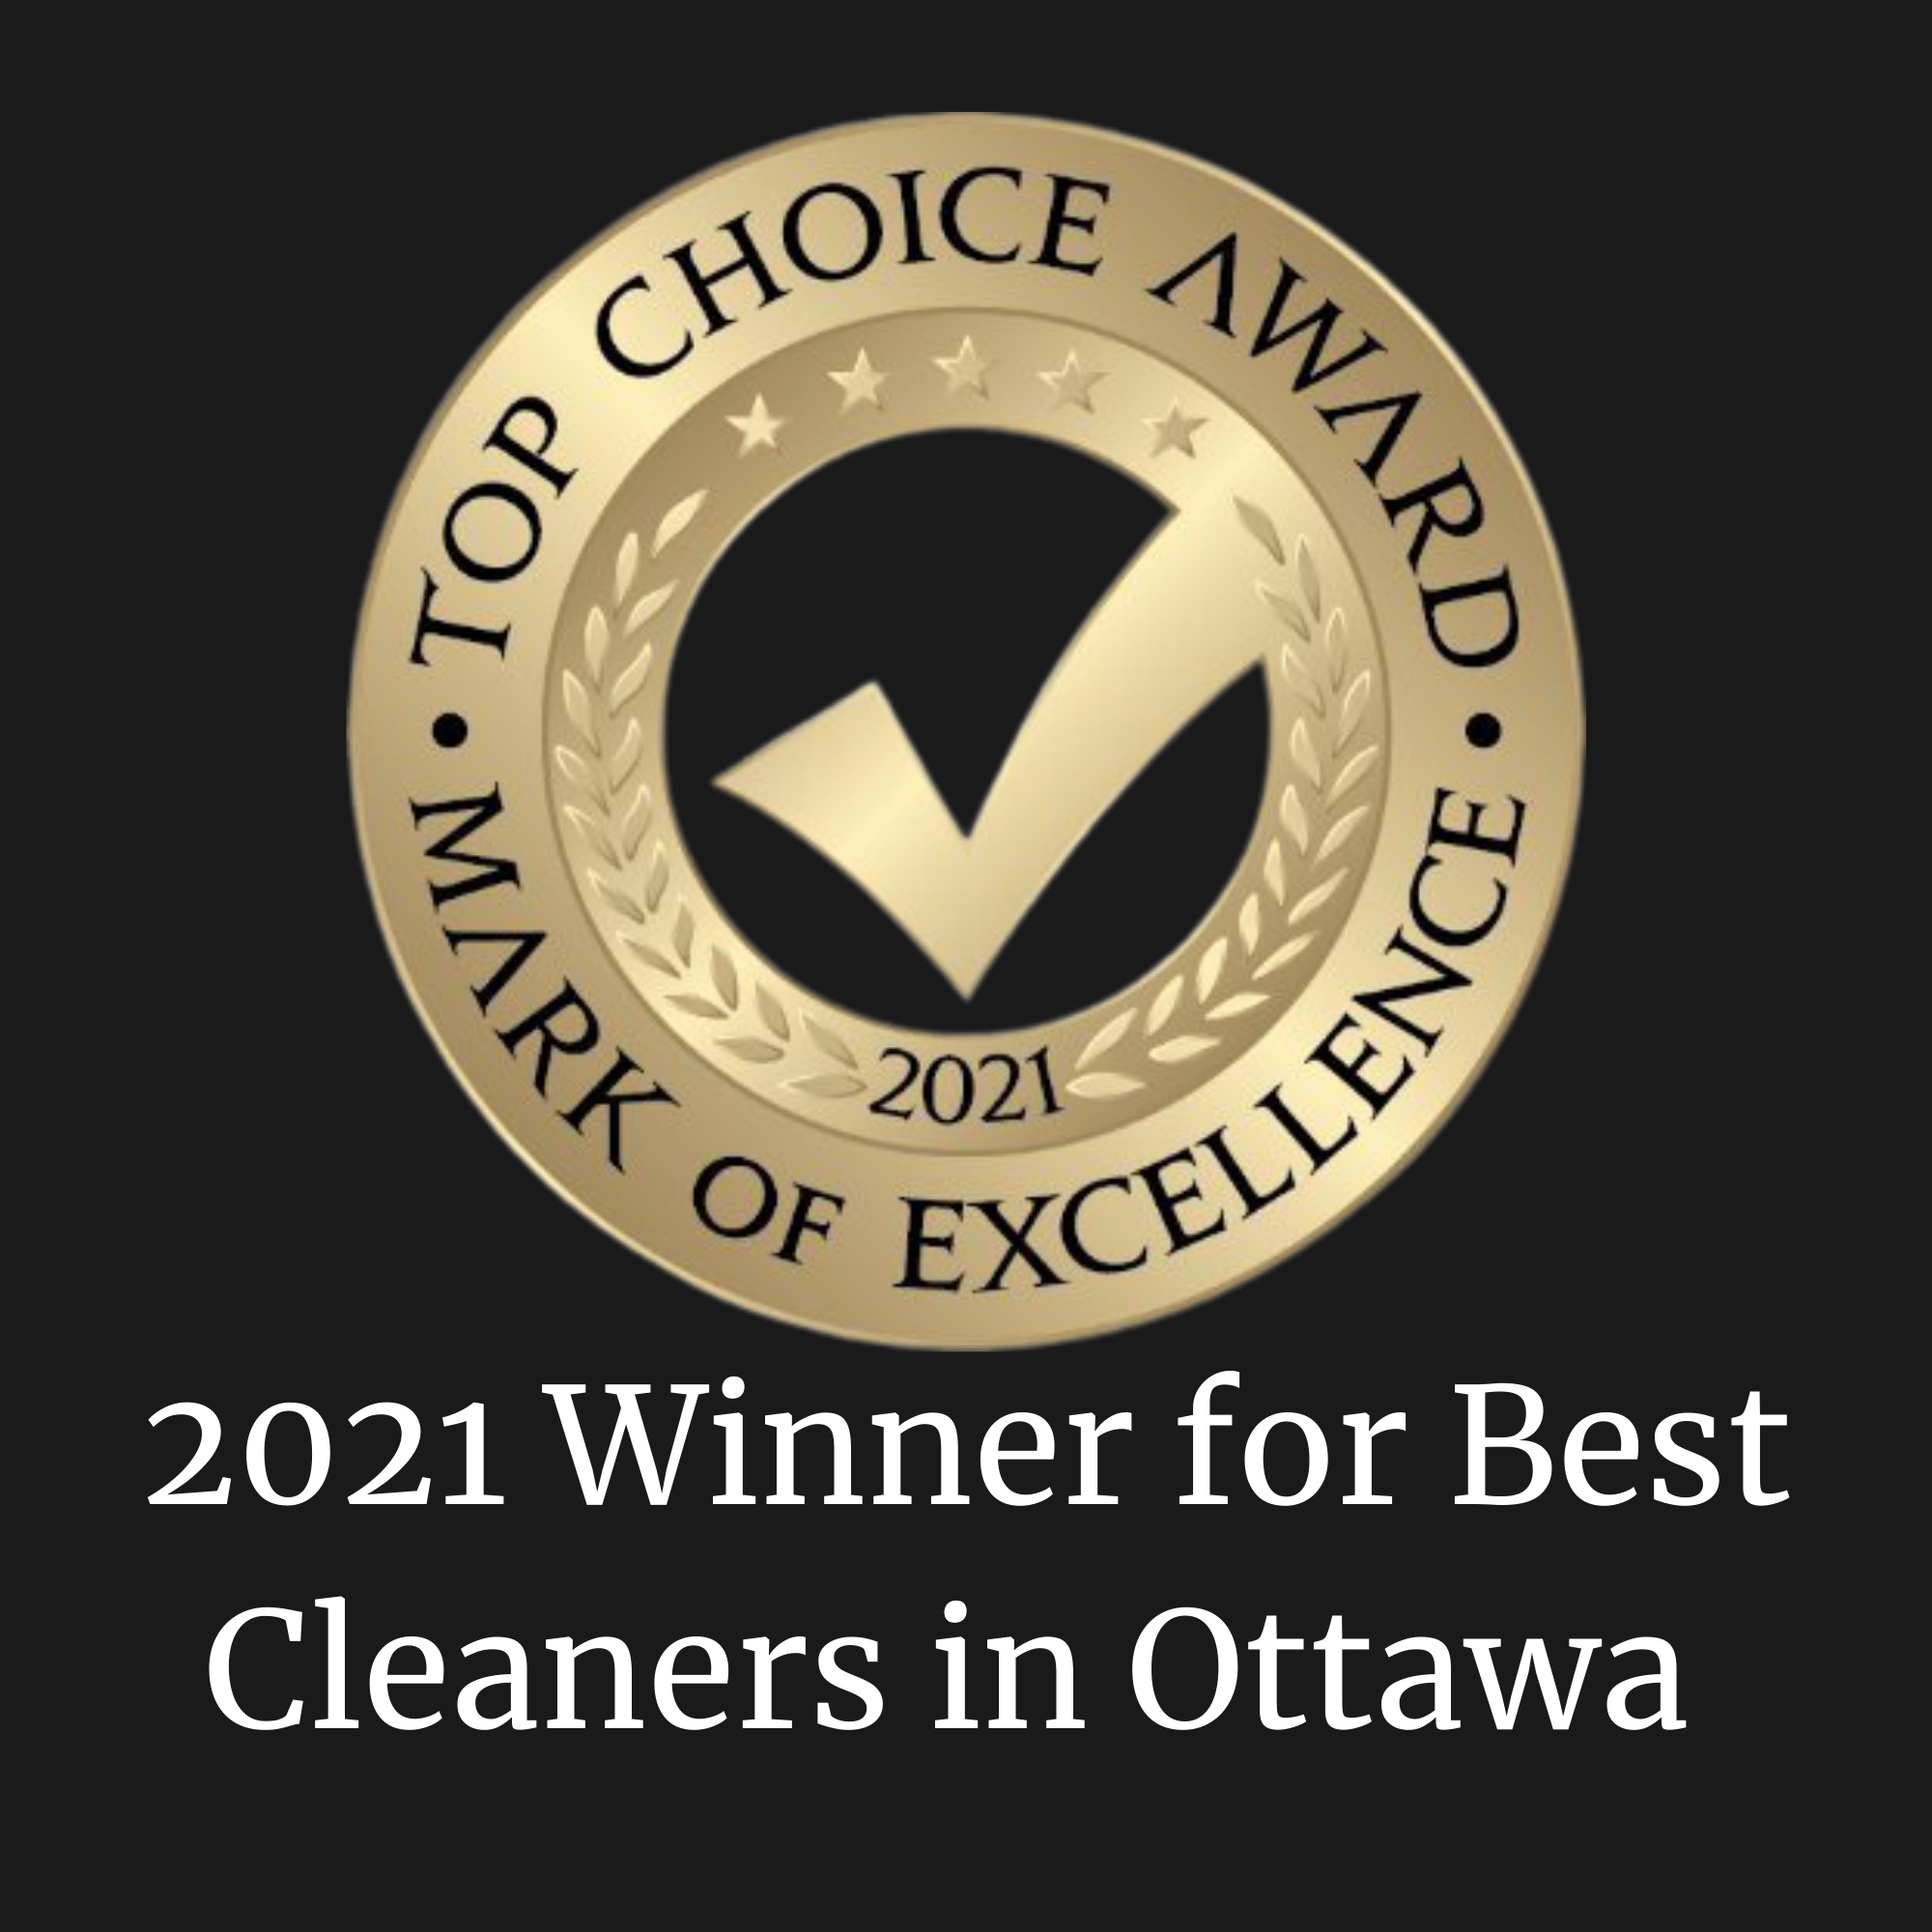 award, excellence, ottawa, best cleaners, best cleaners in ottawa